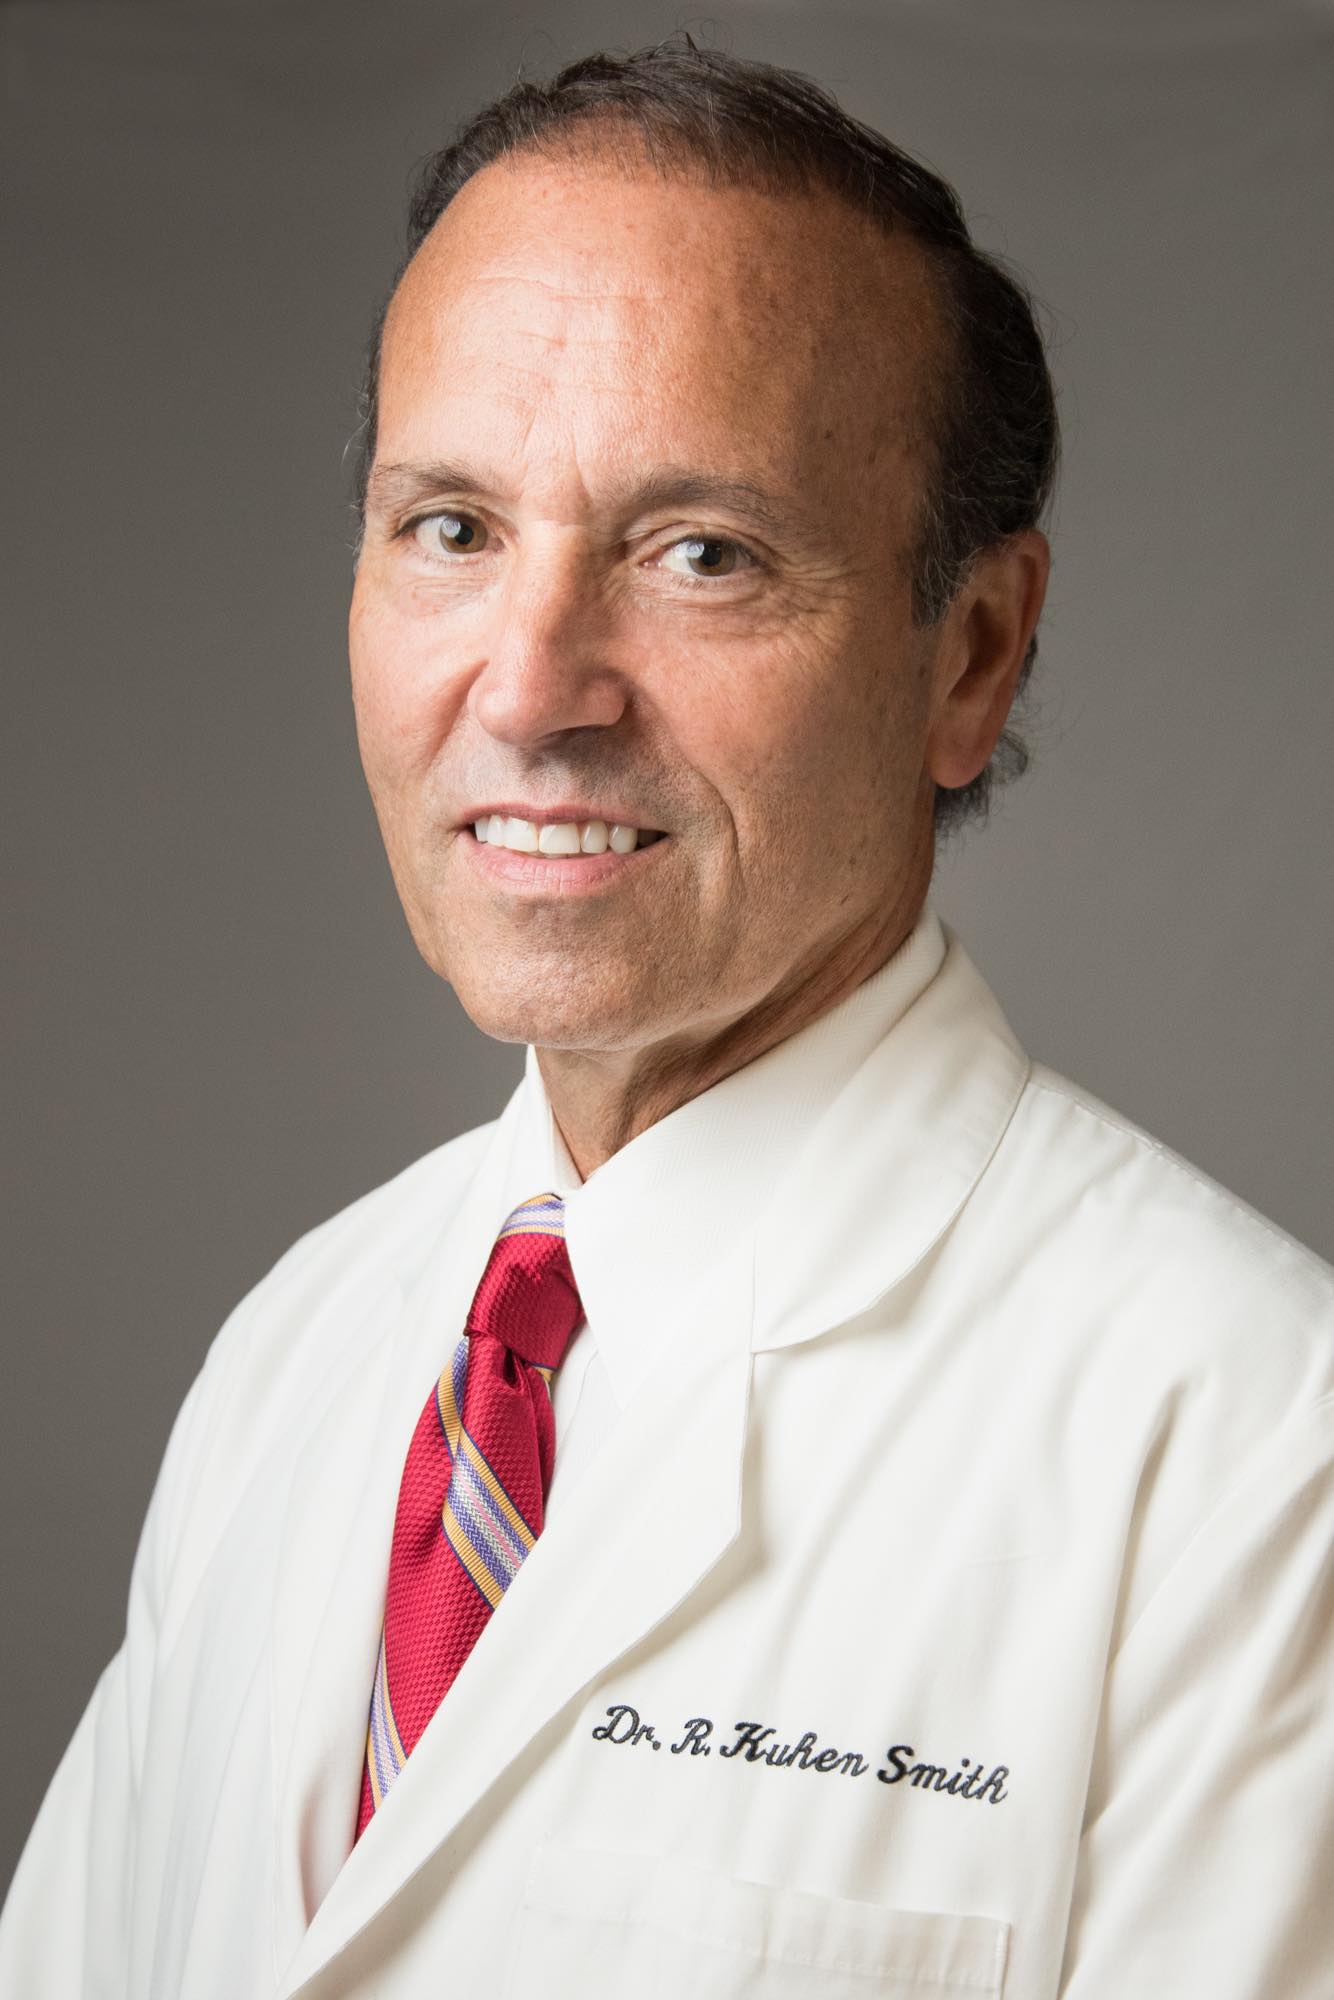 R. Kuhen Smith, DDS